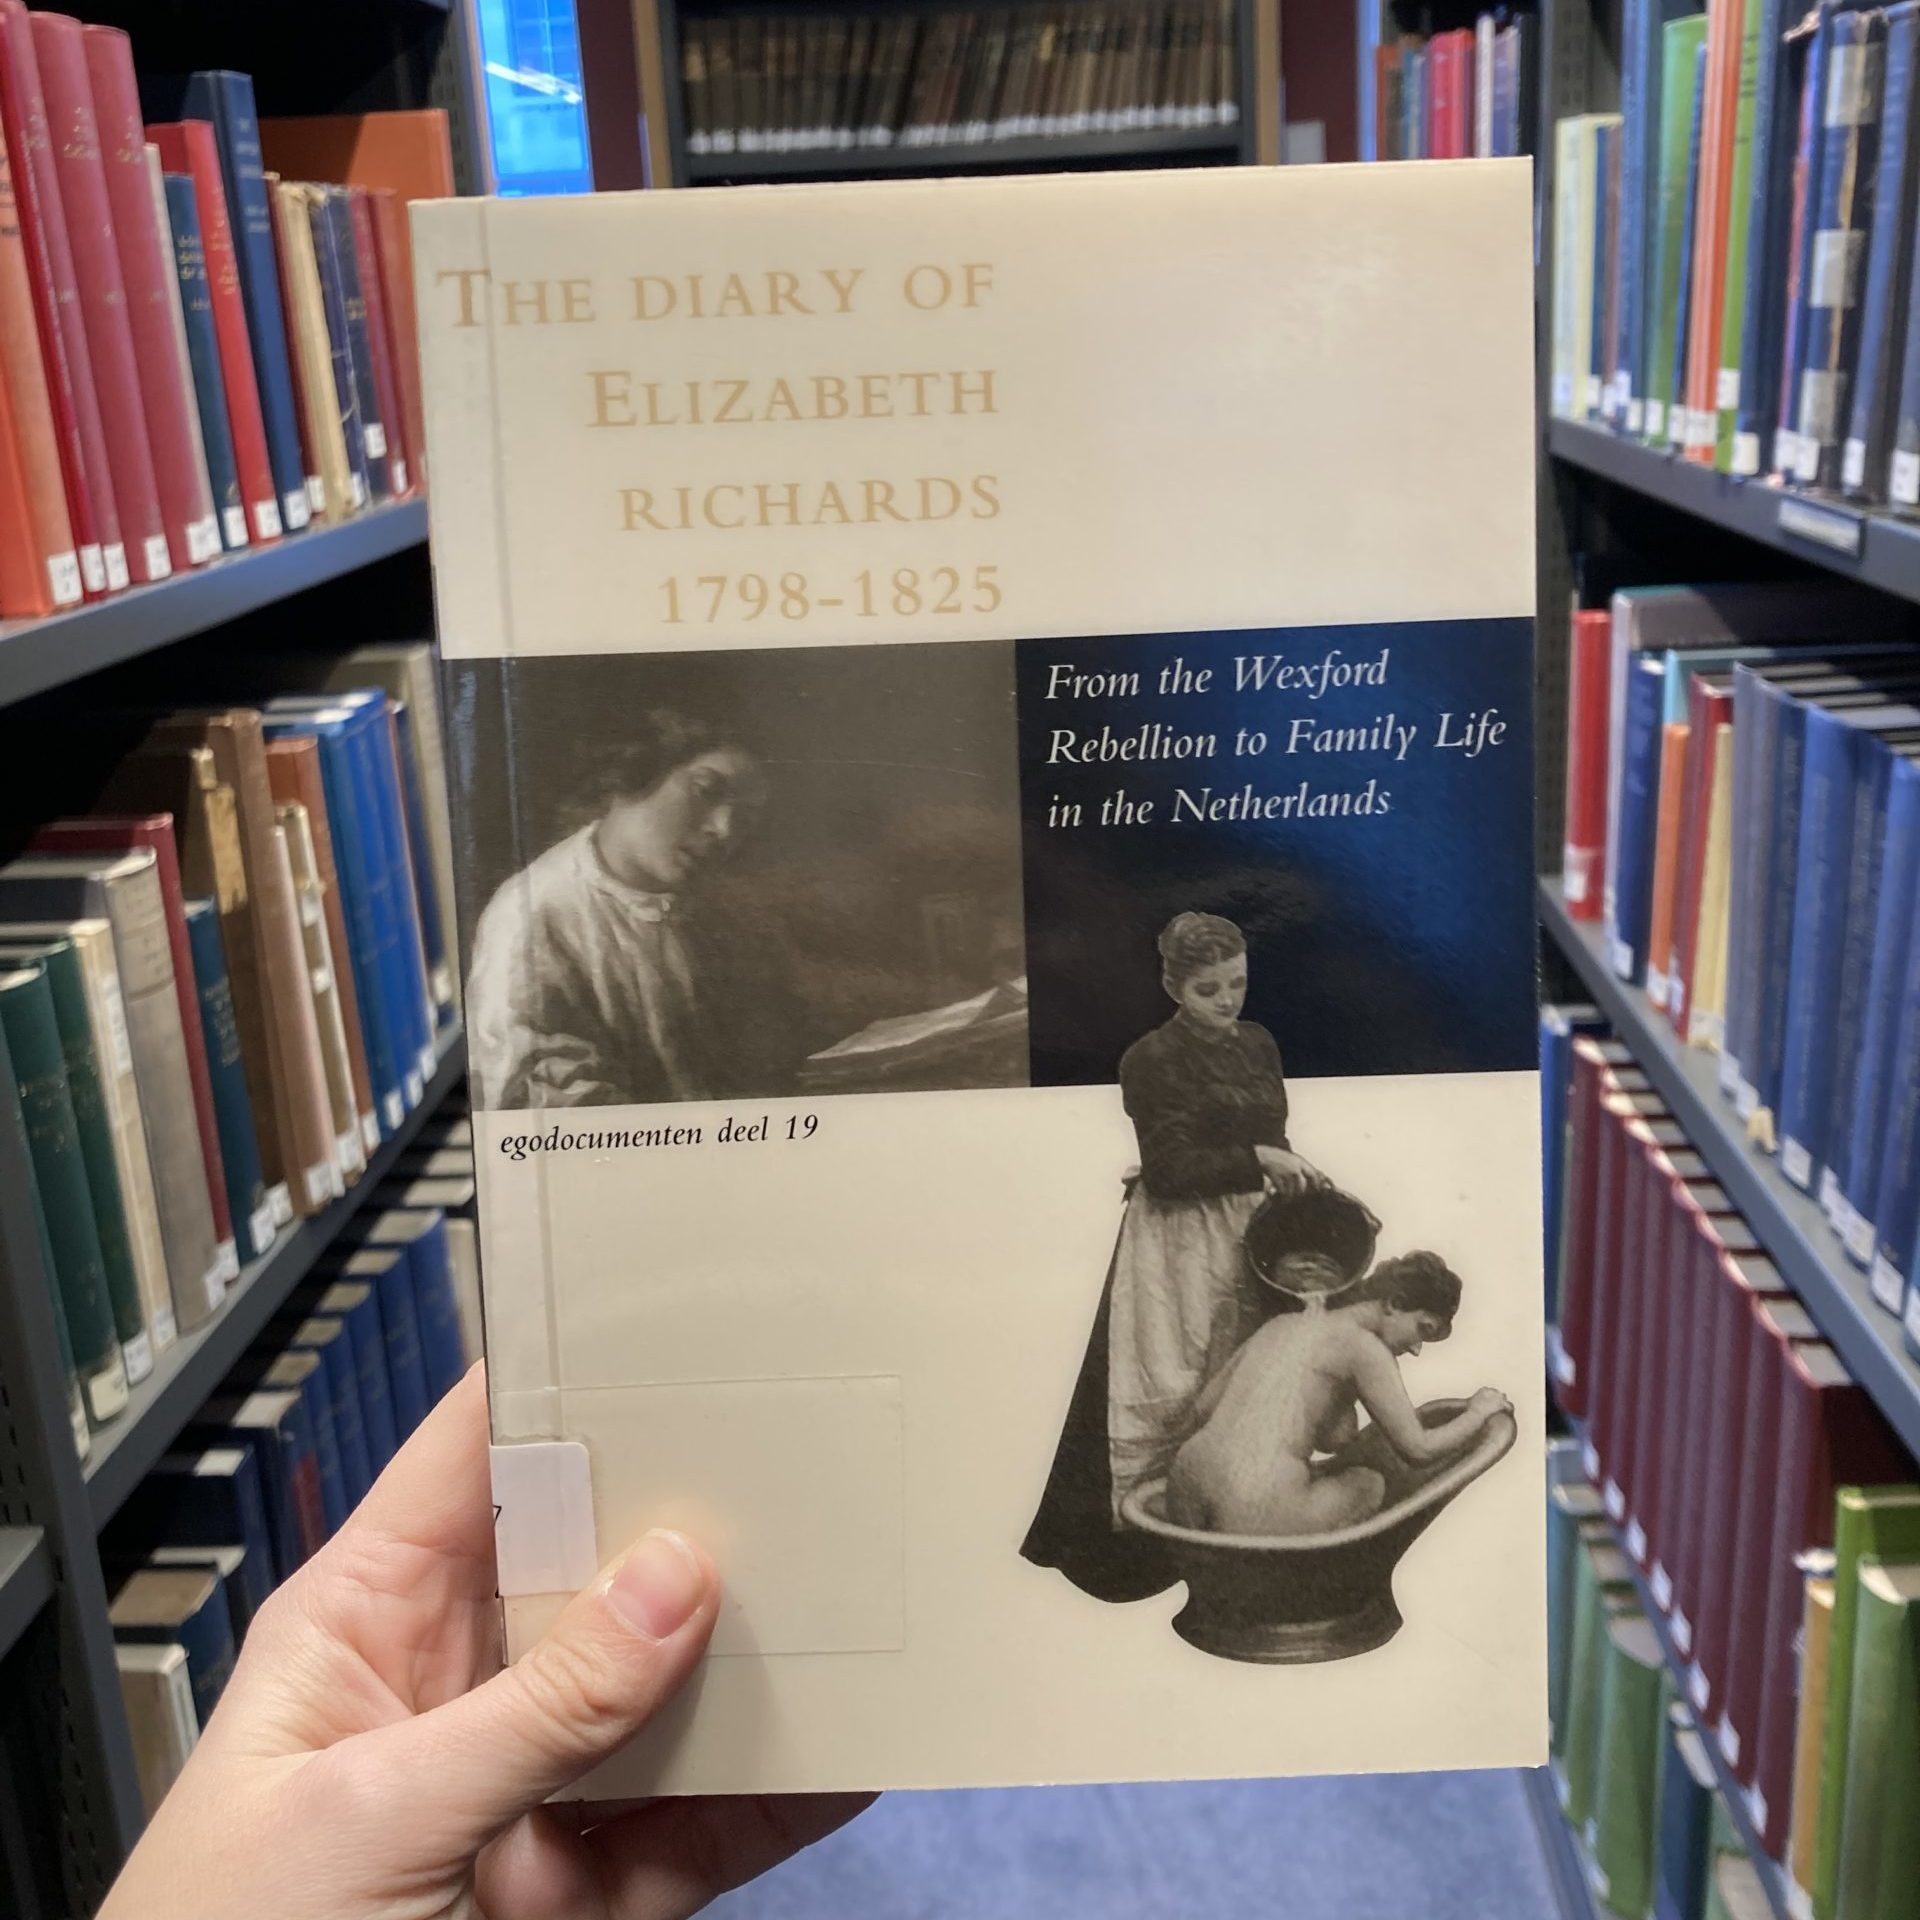 A view of the front cover of 'The Diary of Elizabeth Richards' being held up in between two bookcases